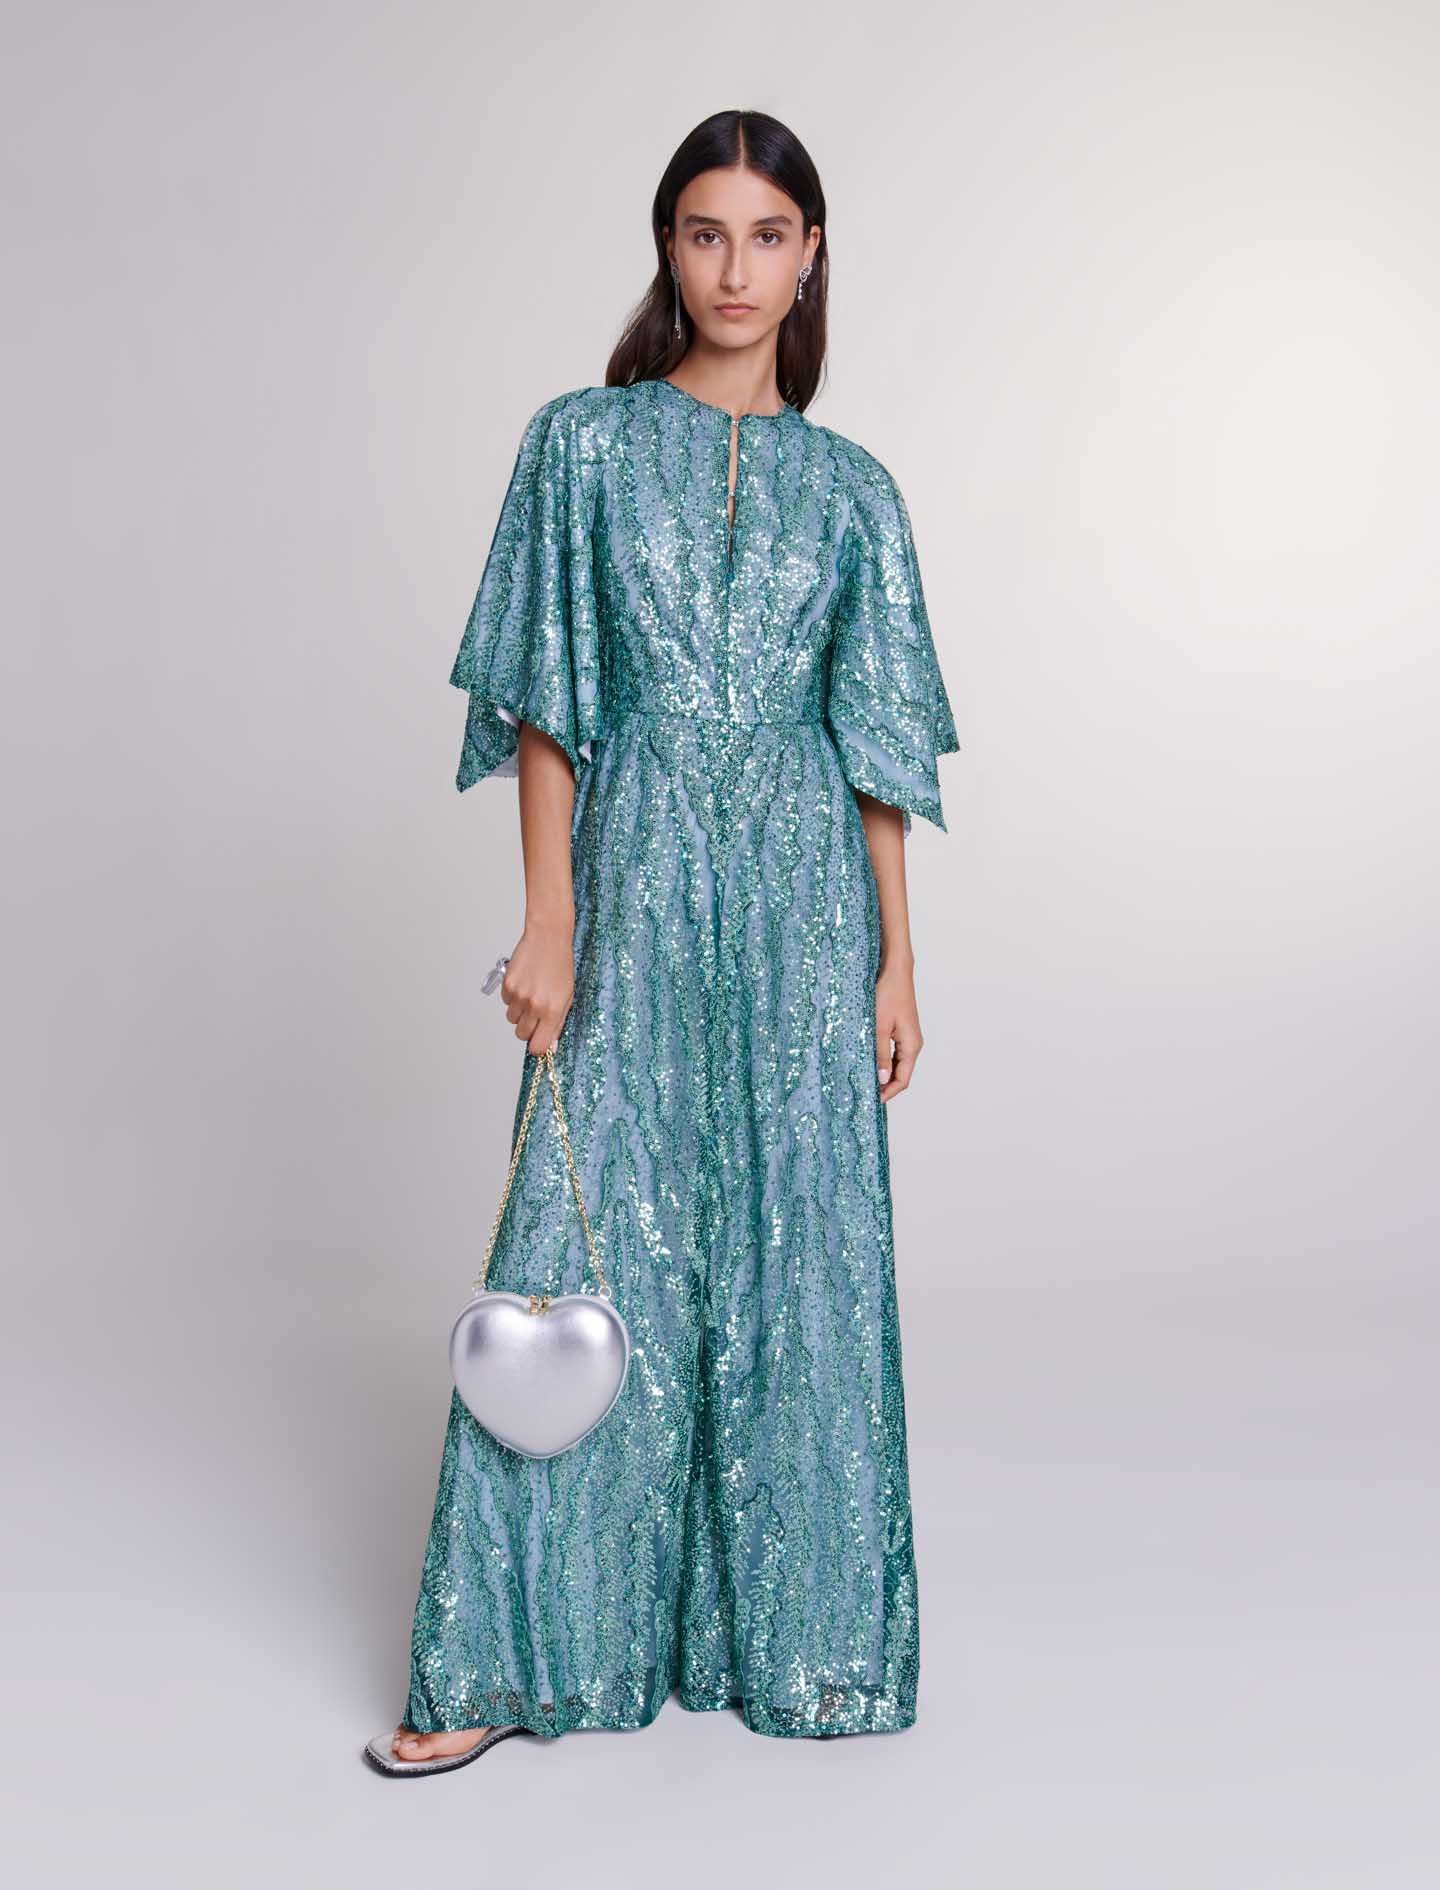 Maje Woman's polyamide Lining: Sequin maxi dress for Spring/Summer, in color Green / Grey